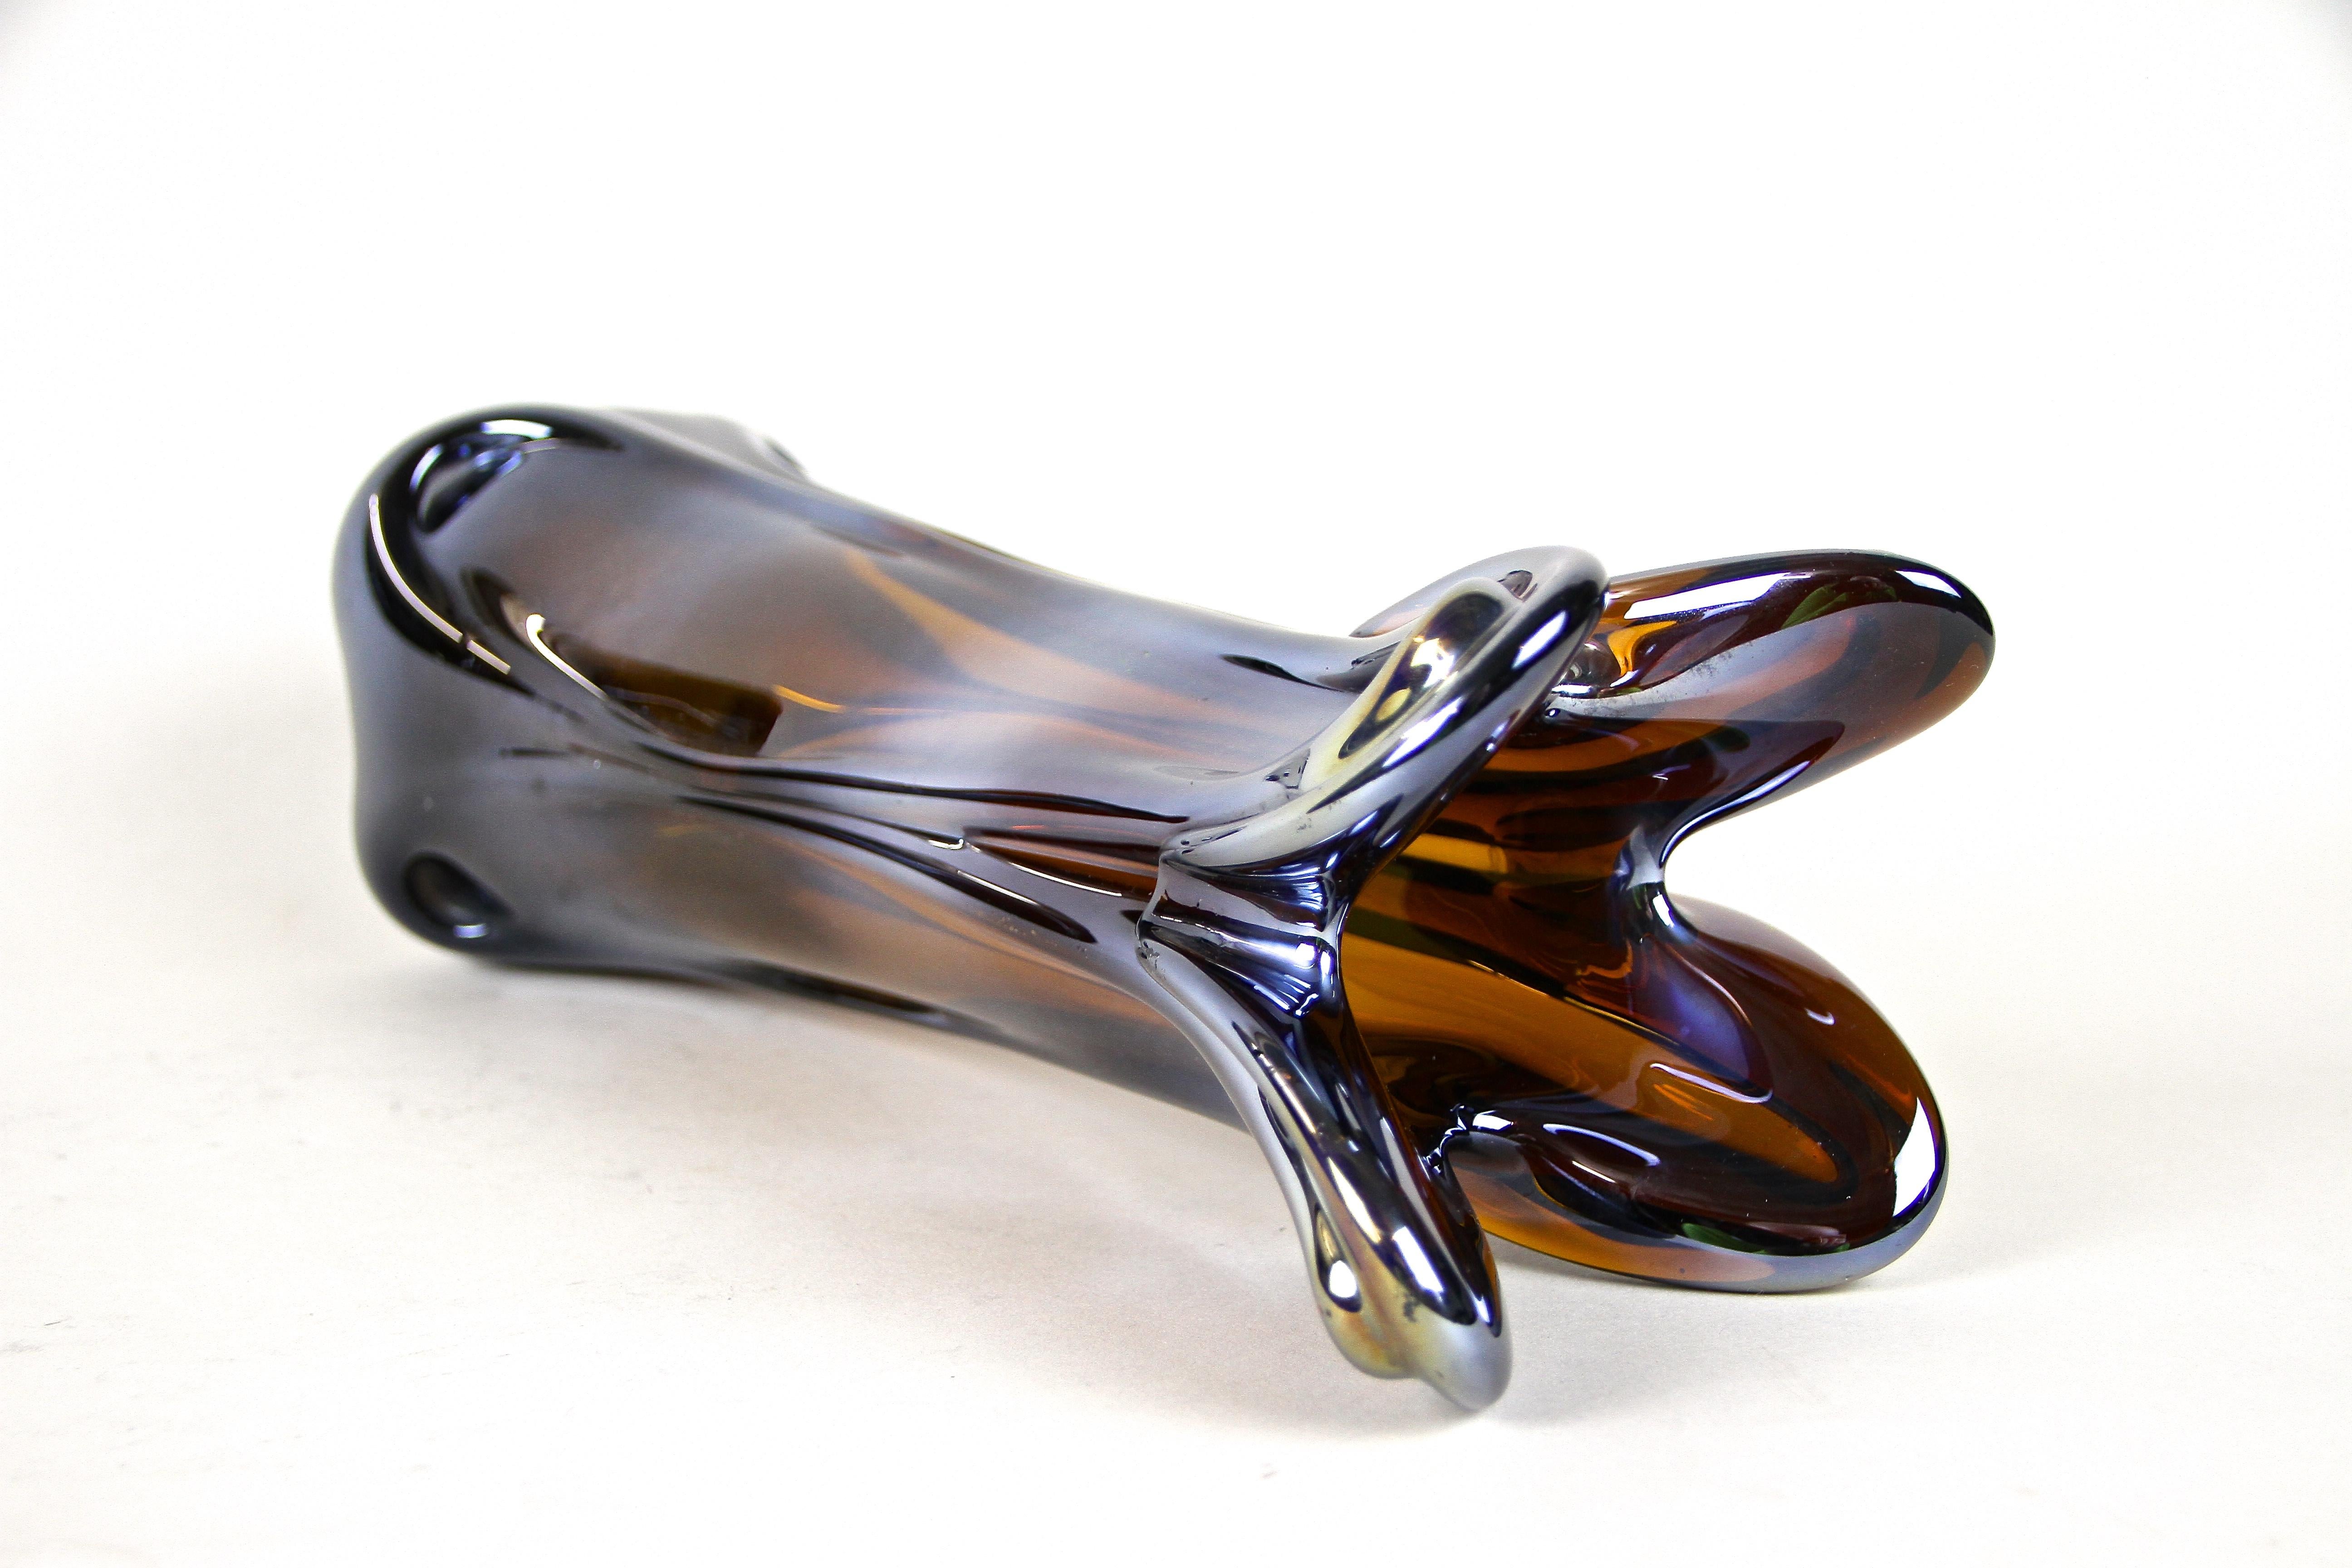 Iridiscent Murano Glass Vase Amber Colored with Chrome Effect, Italy circa 1970 For Sale 6